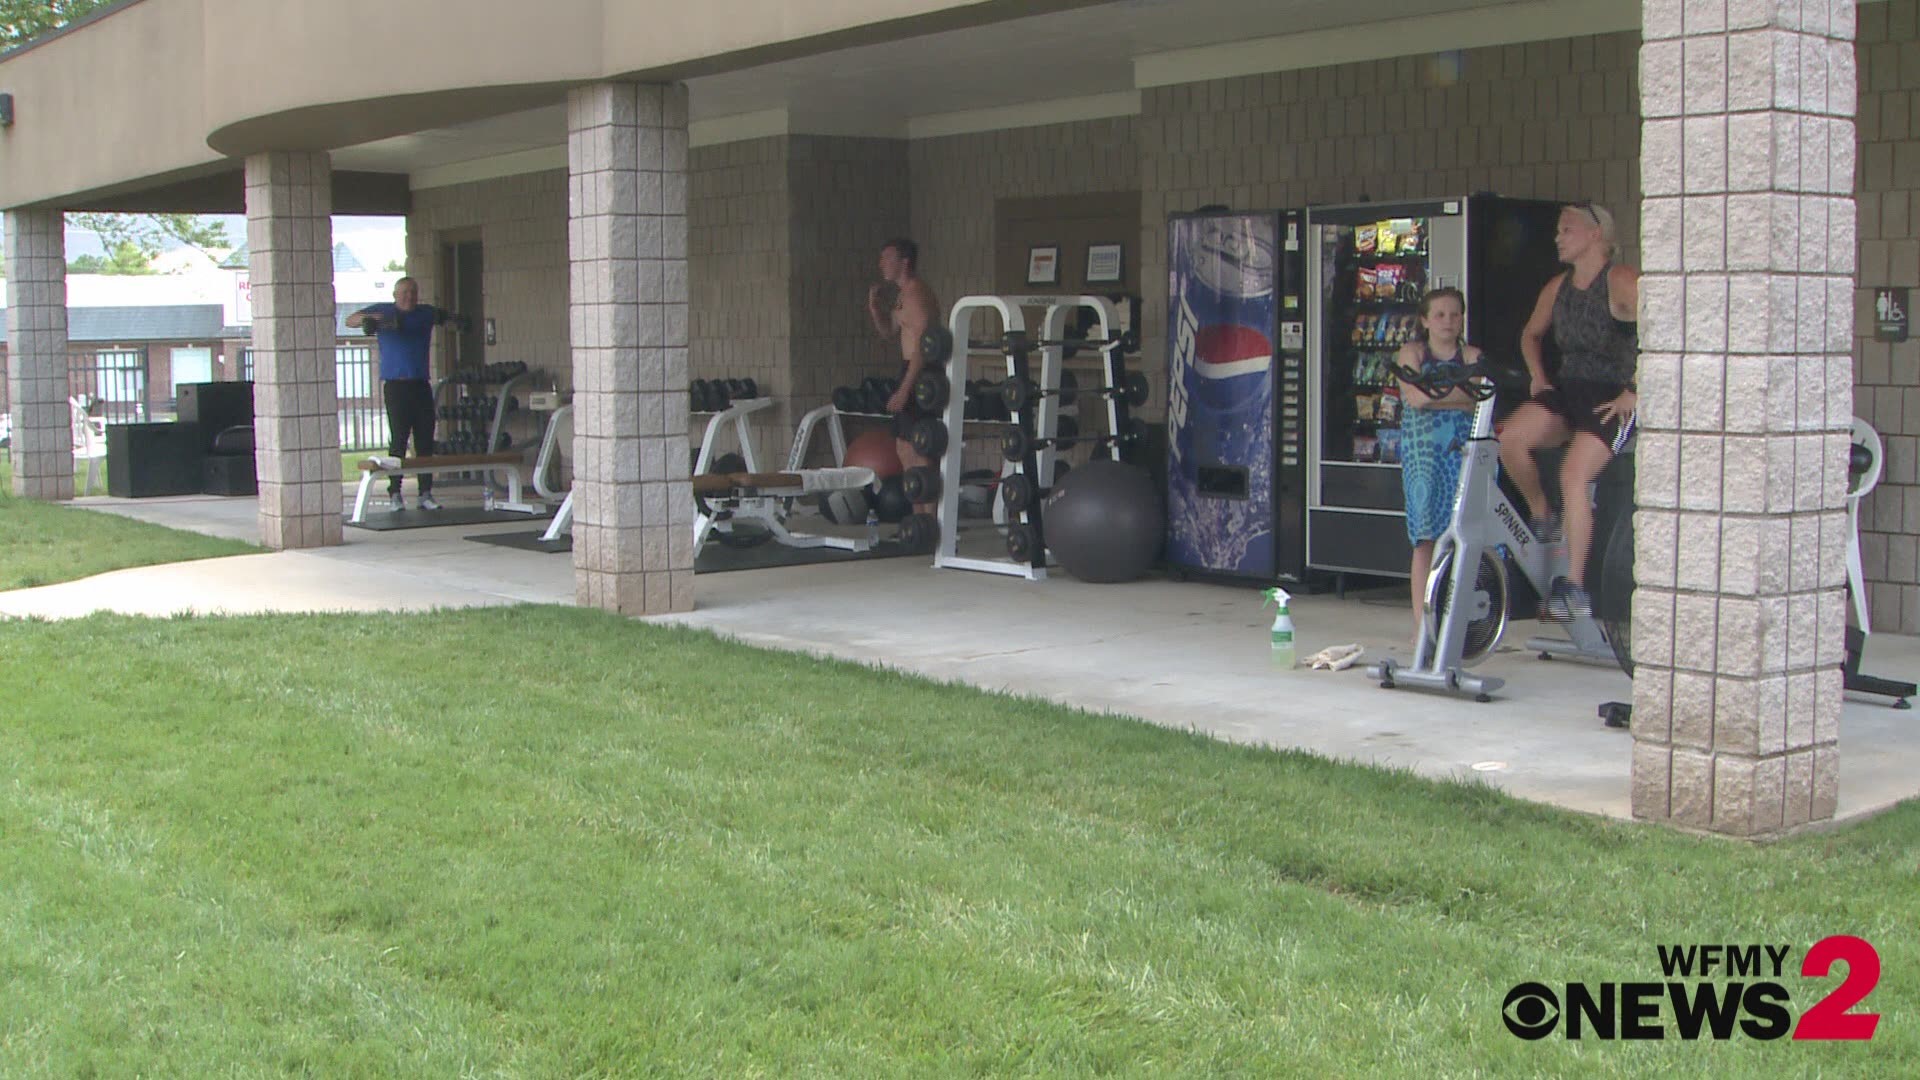 One gym owner said he hopes the governor will sign the bill into law and allow his gym to reopen.